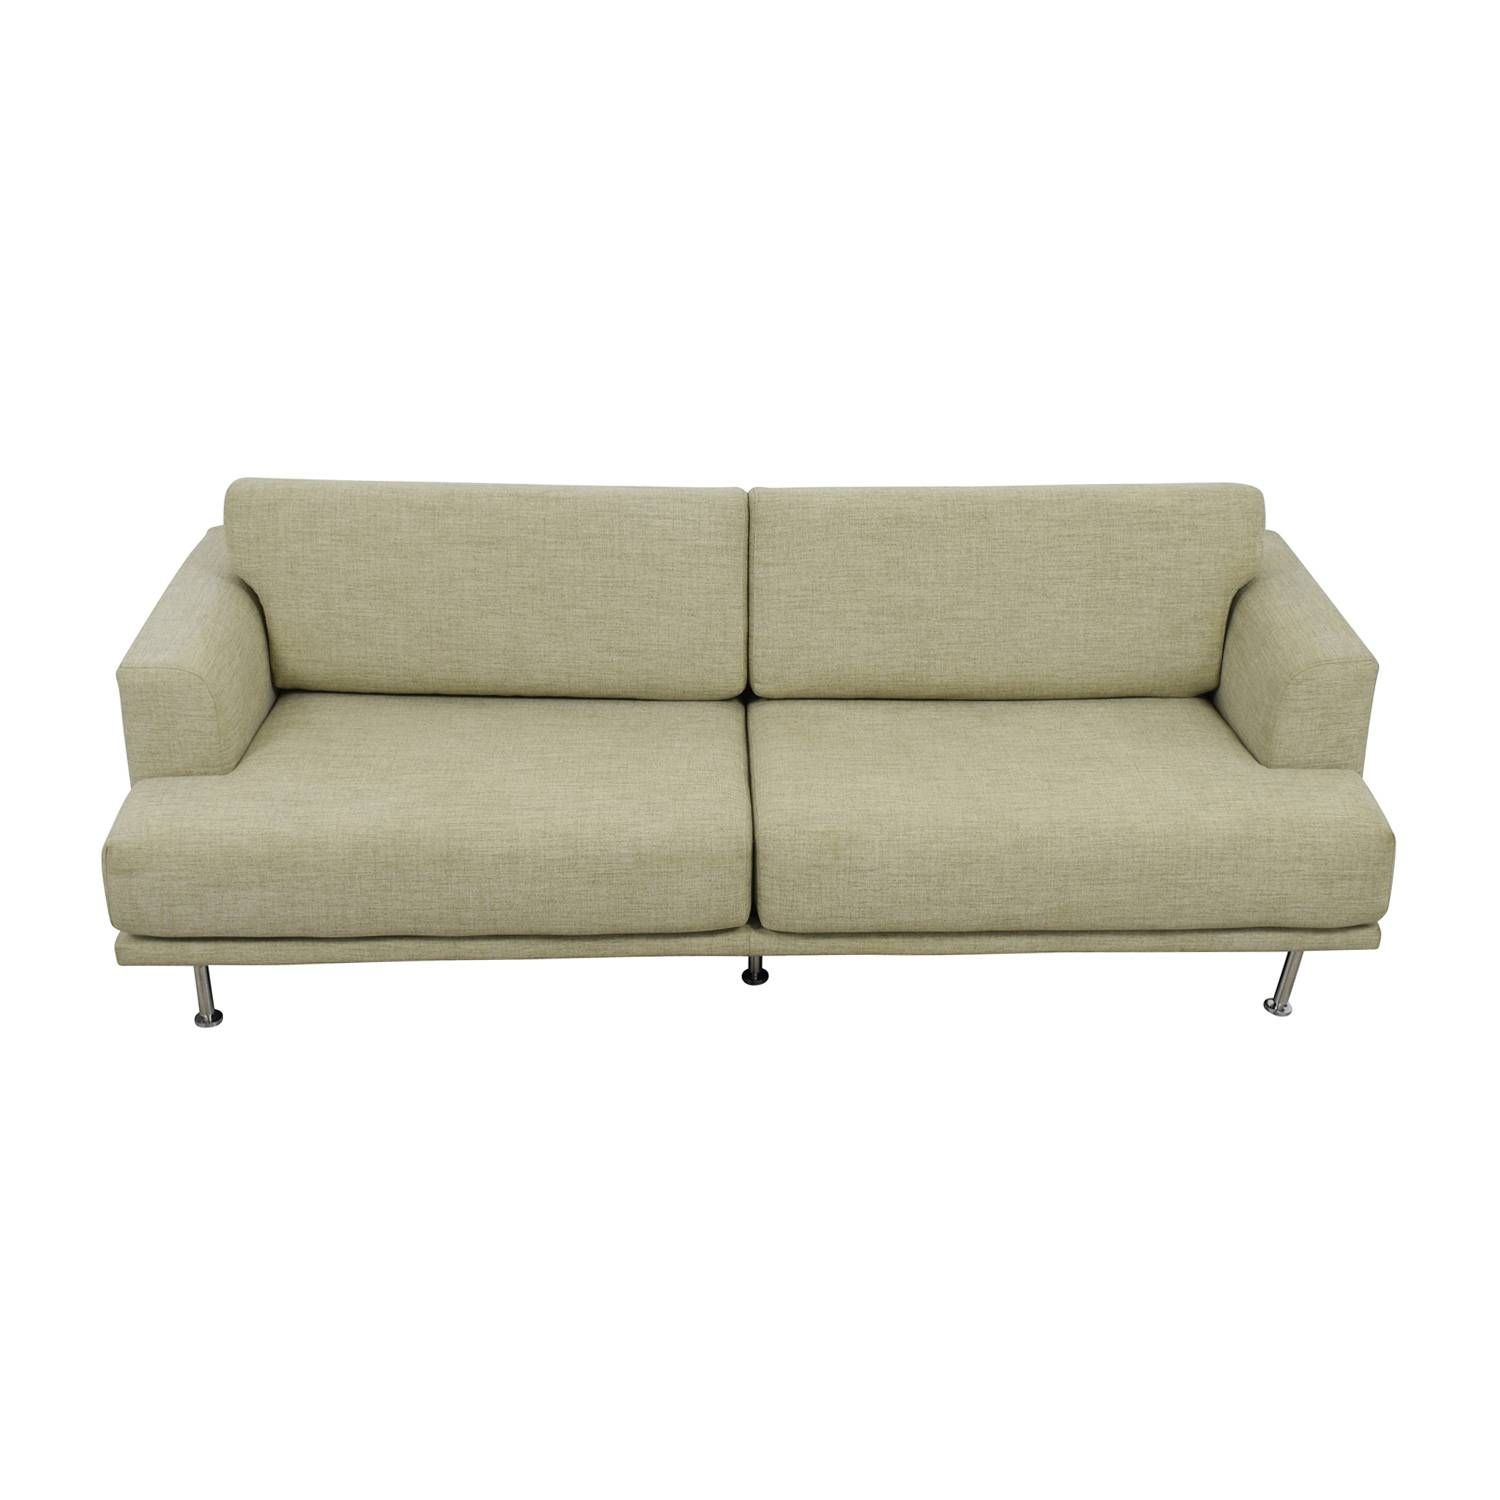 Classic Sofas: Used Classic Sofas For Sale Within Classic Sofas For Sale (View 26 of 30)